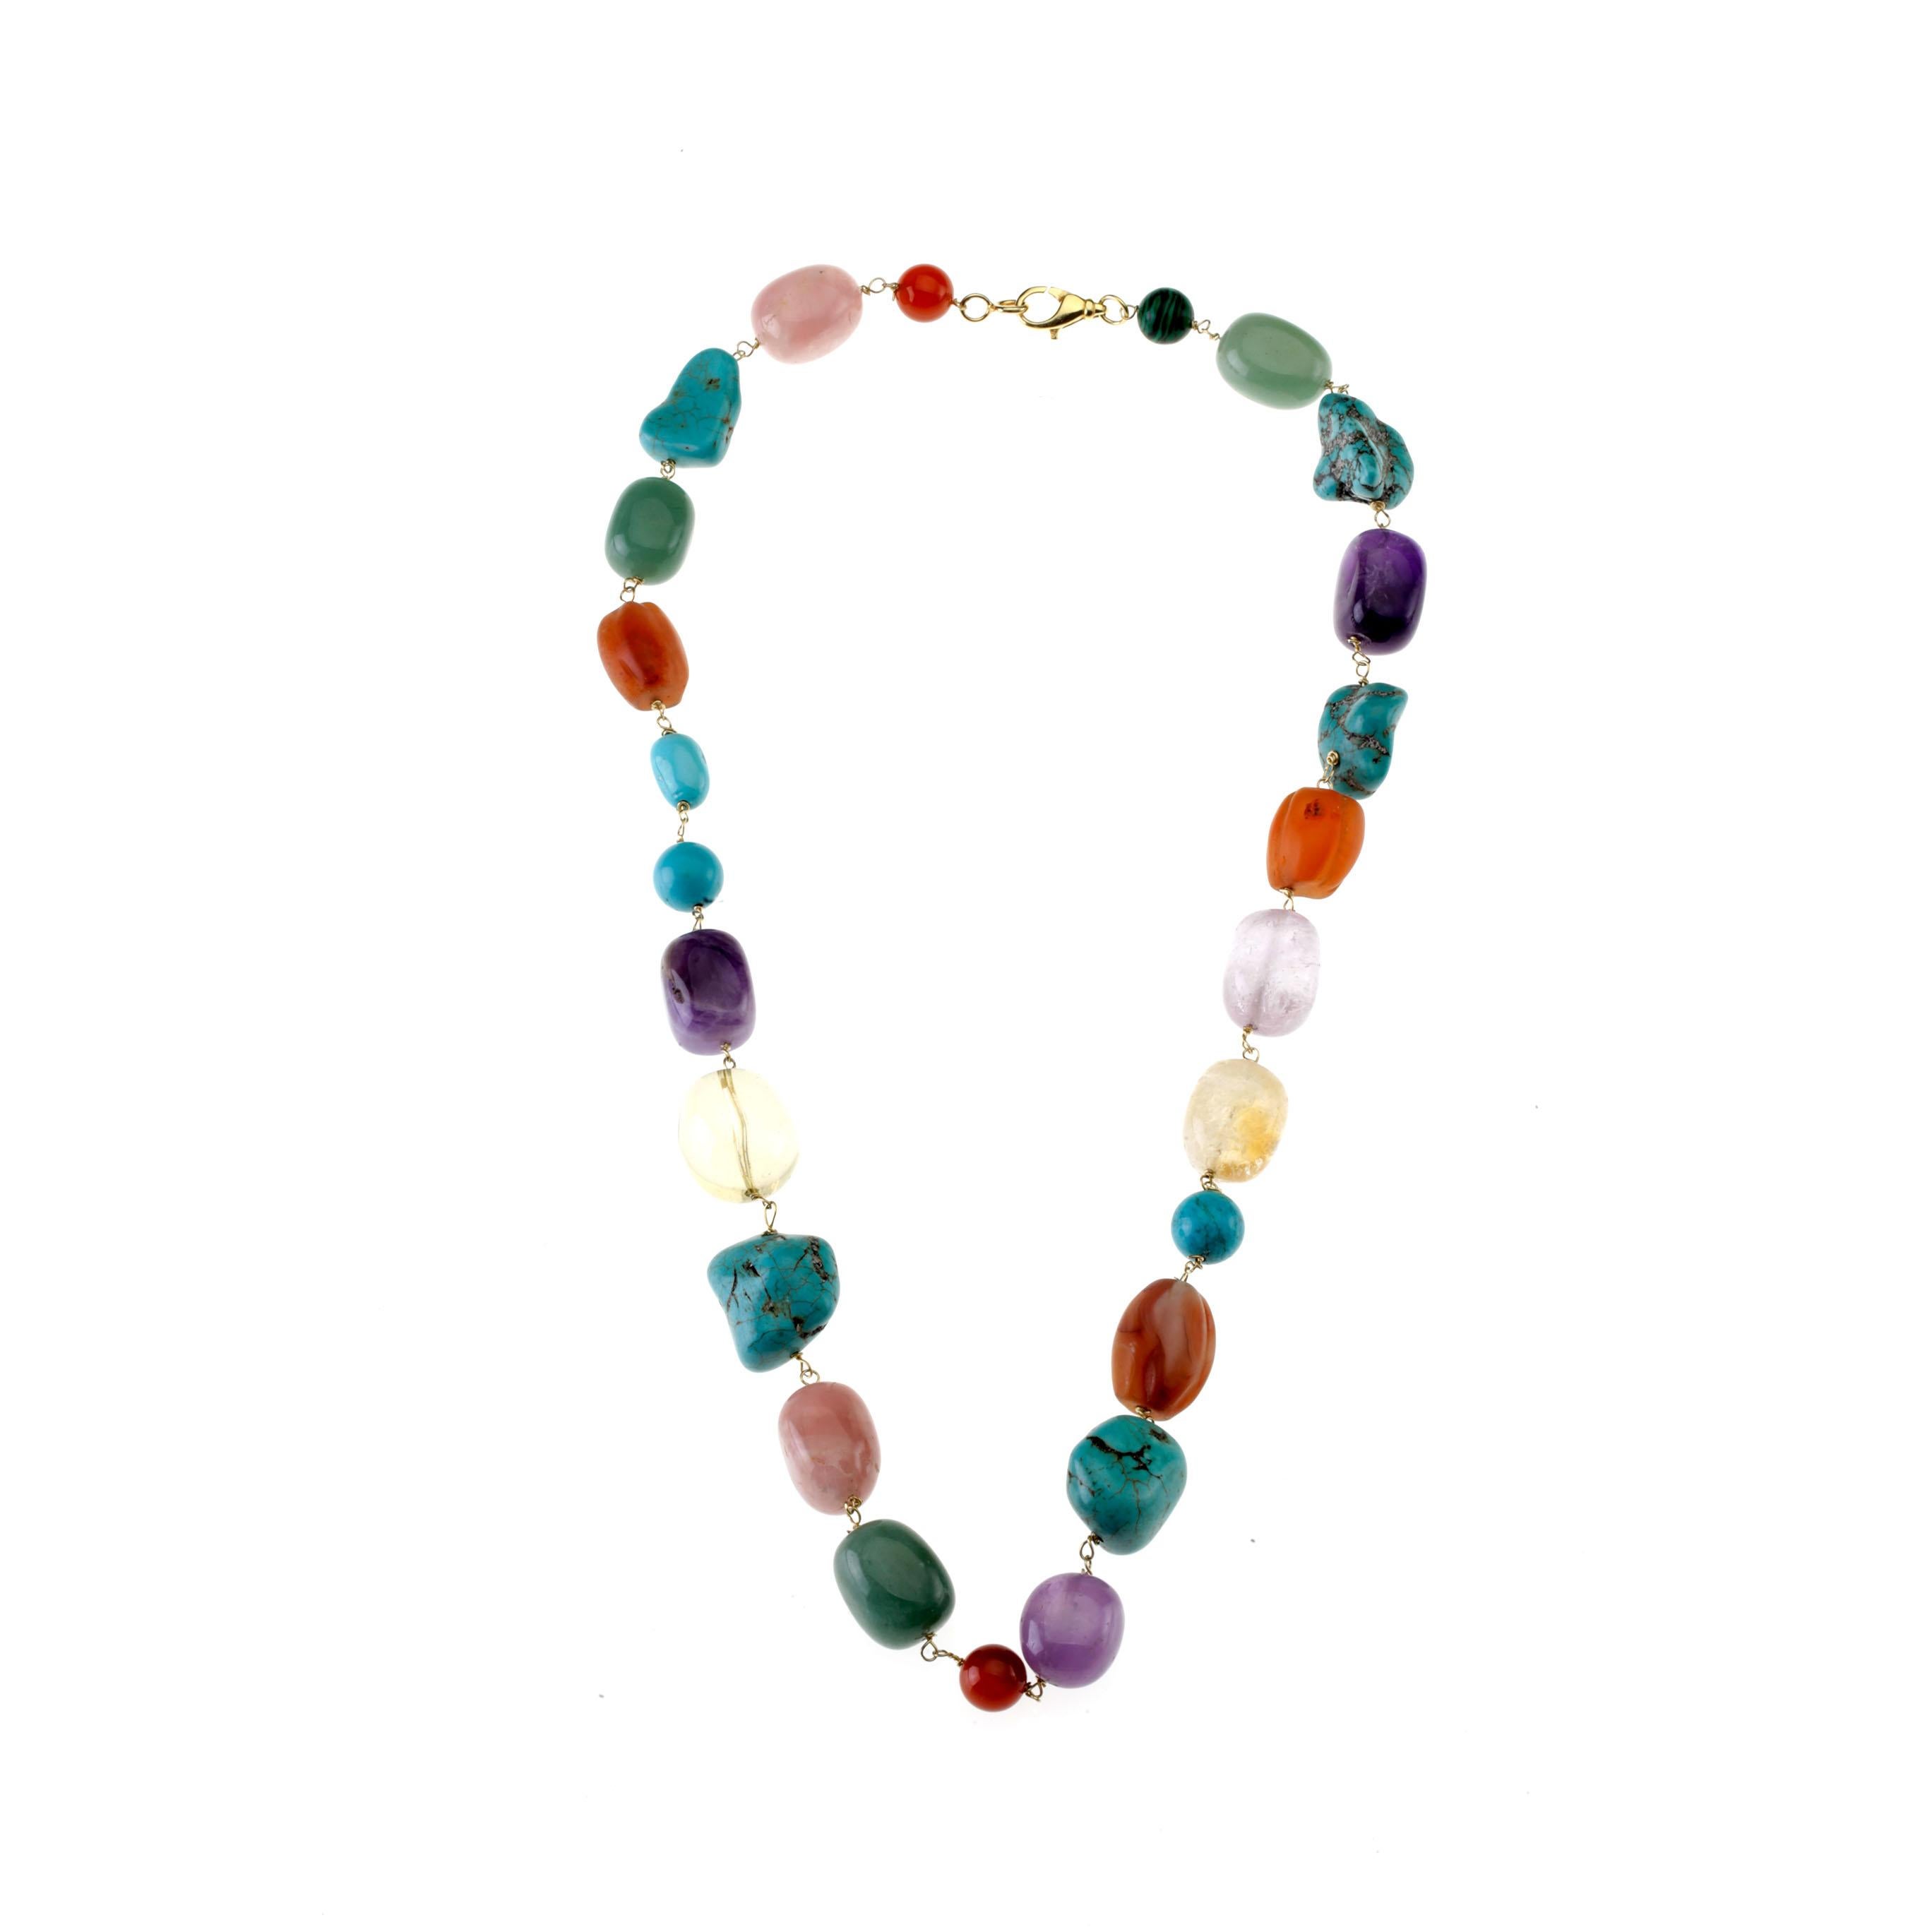 Amethyst Turquoise Carnelian Citrine Vermeille Necklace. Length 80cm.
All Giulia Colussi jewelry is new and has never been previously owned or worn. Each item will arrive at your door beautifully gift wrapped in our boxes, put inside an elegant